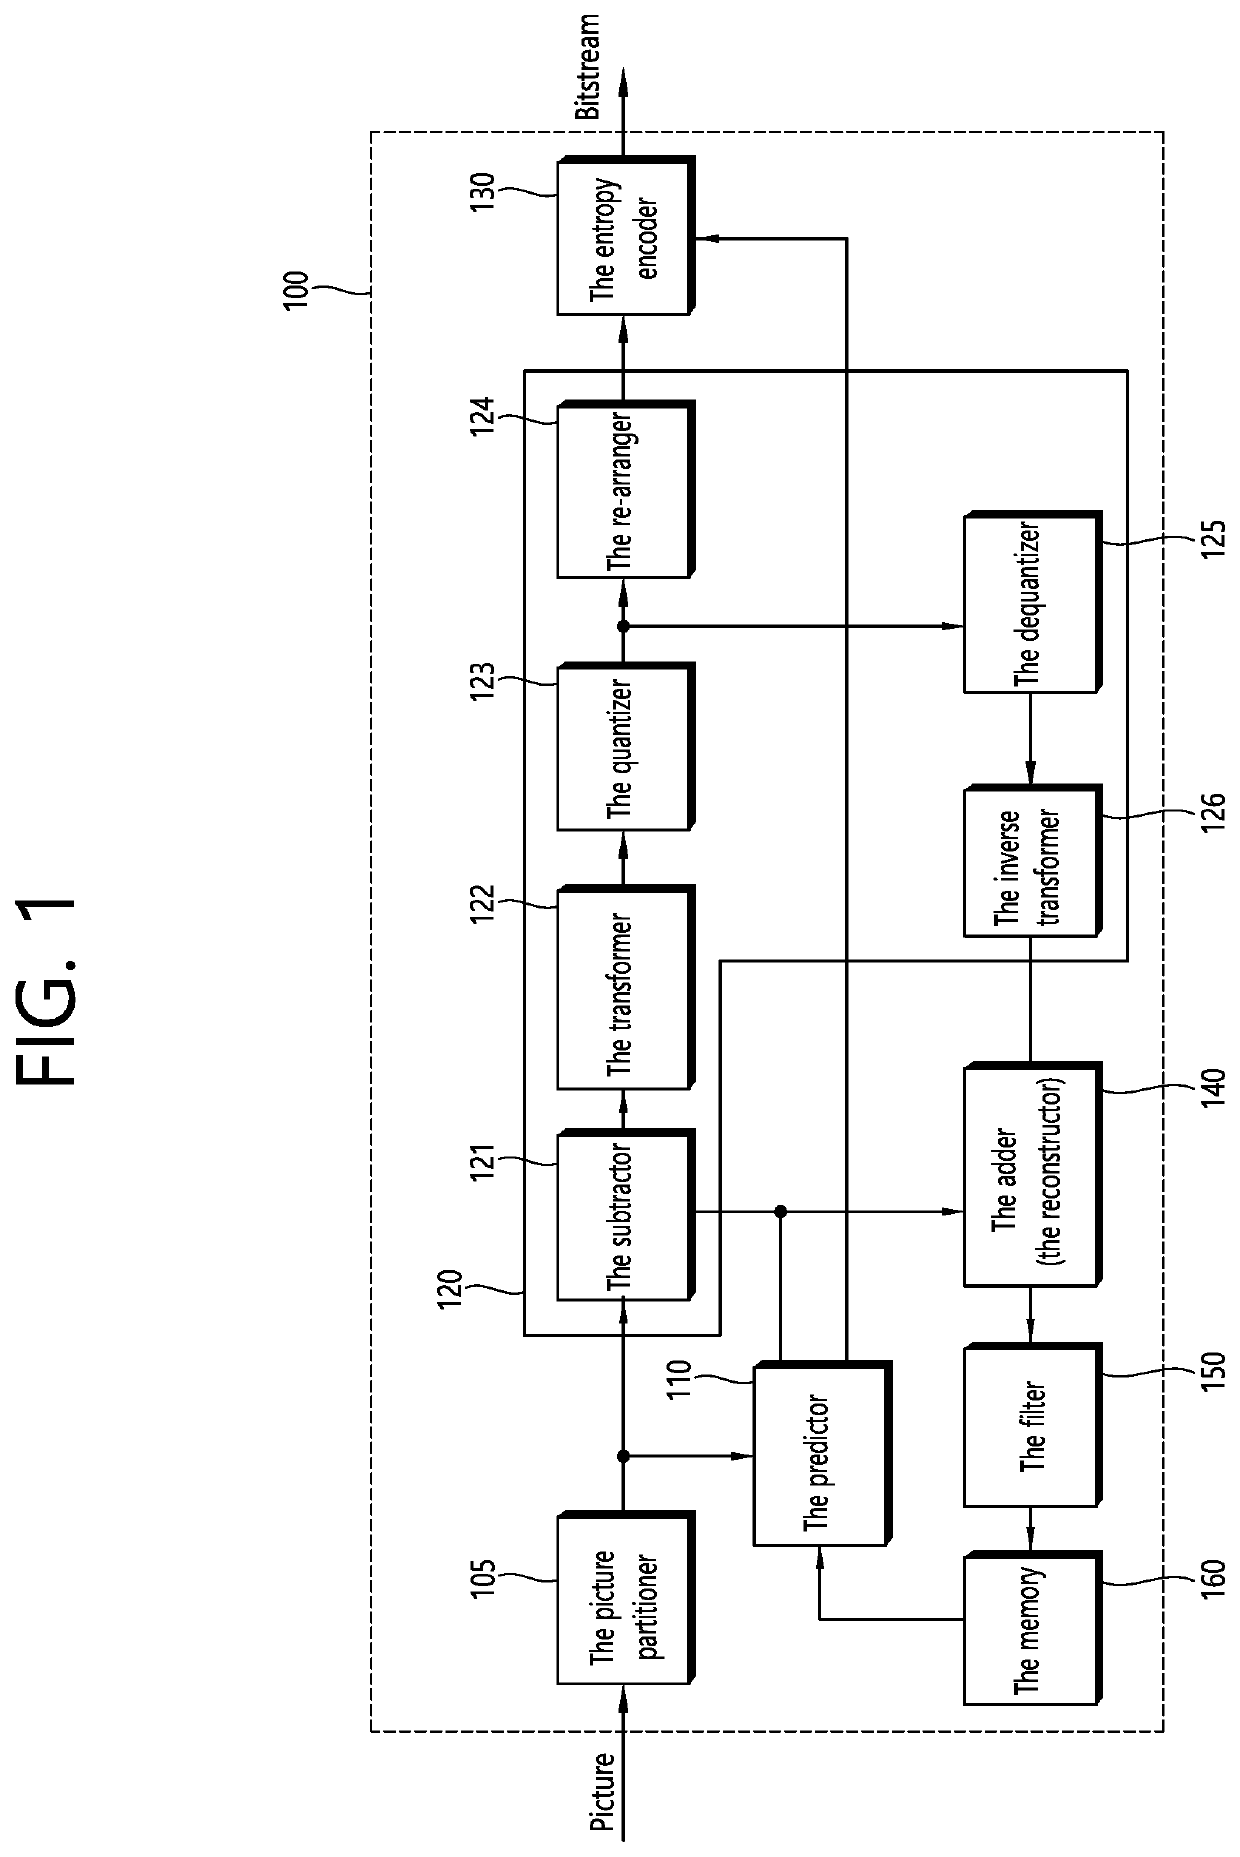 Image decoding method and apparatus based on inter-prediction in image coding system